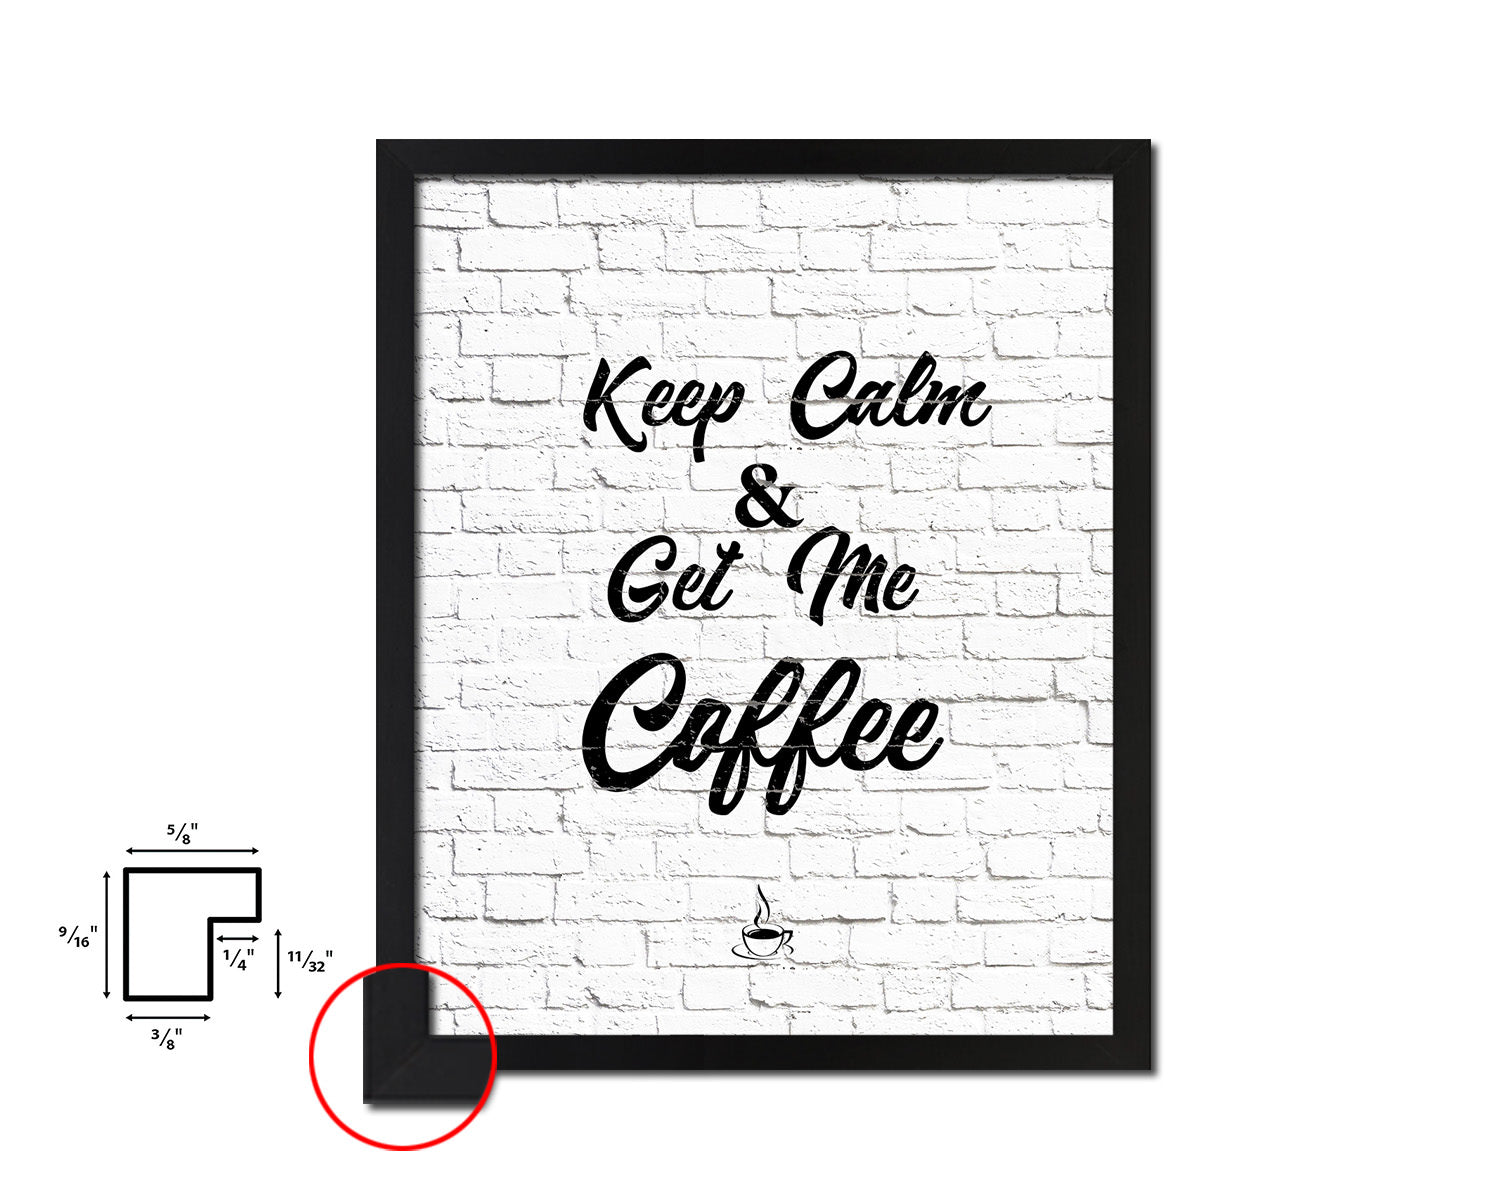 Keep calm & get me a coffee Quote Framed Artwork Print Wall Decor Art Gifts